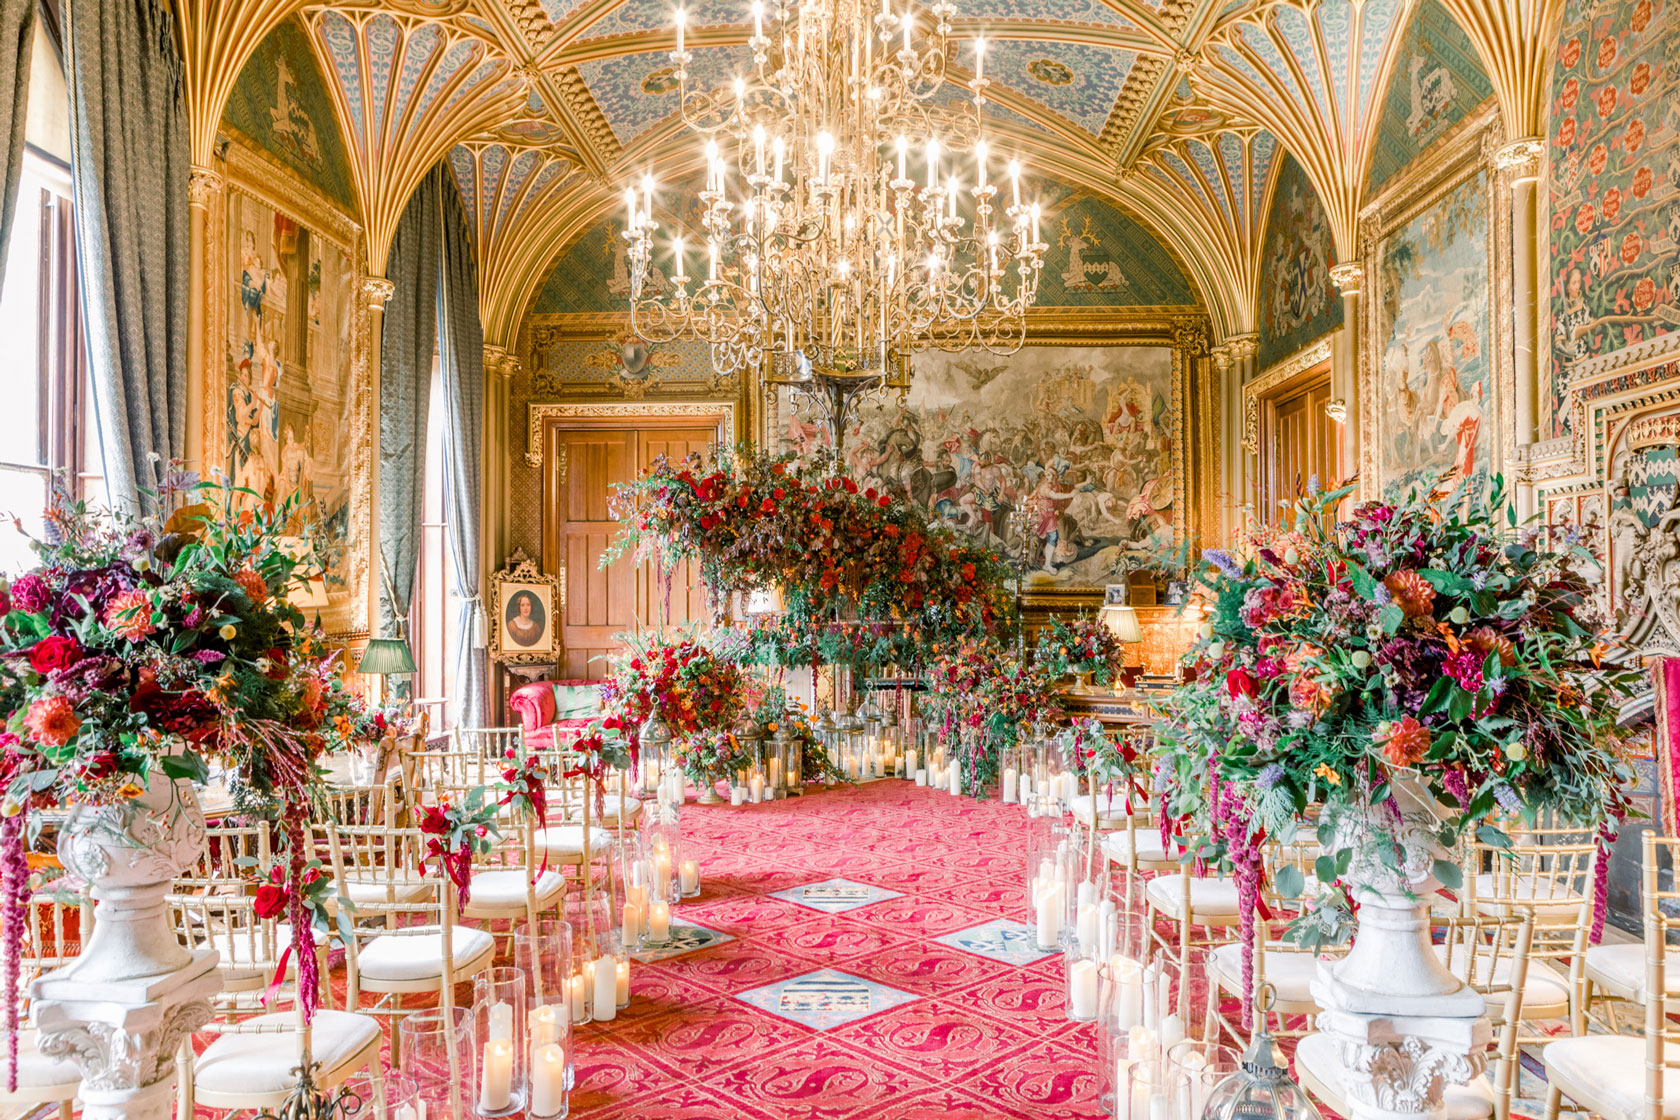 An ornate regal ceremony in a castle fit for a royal couple